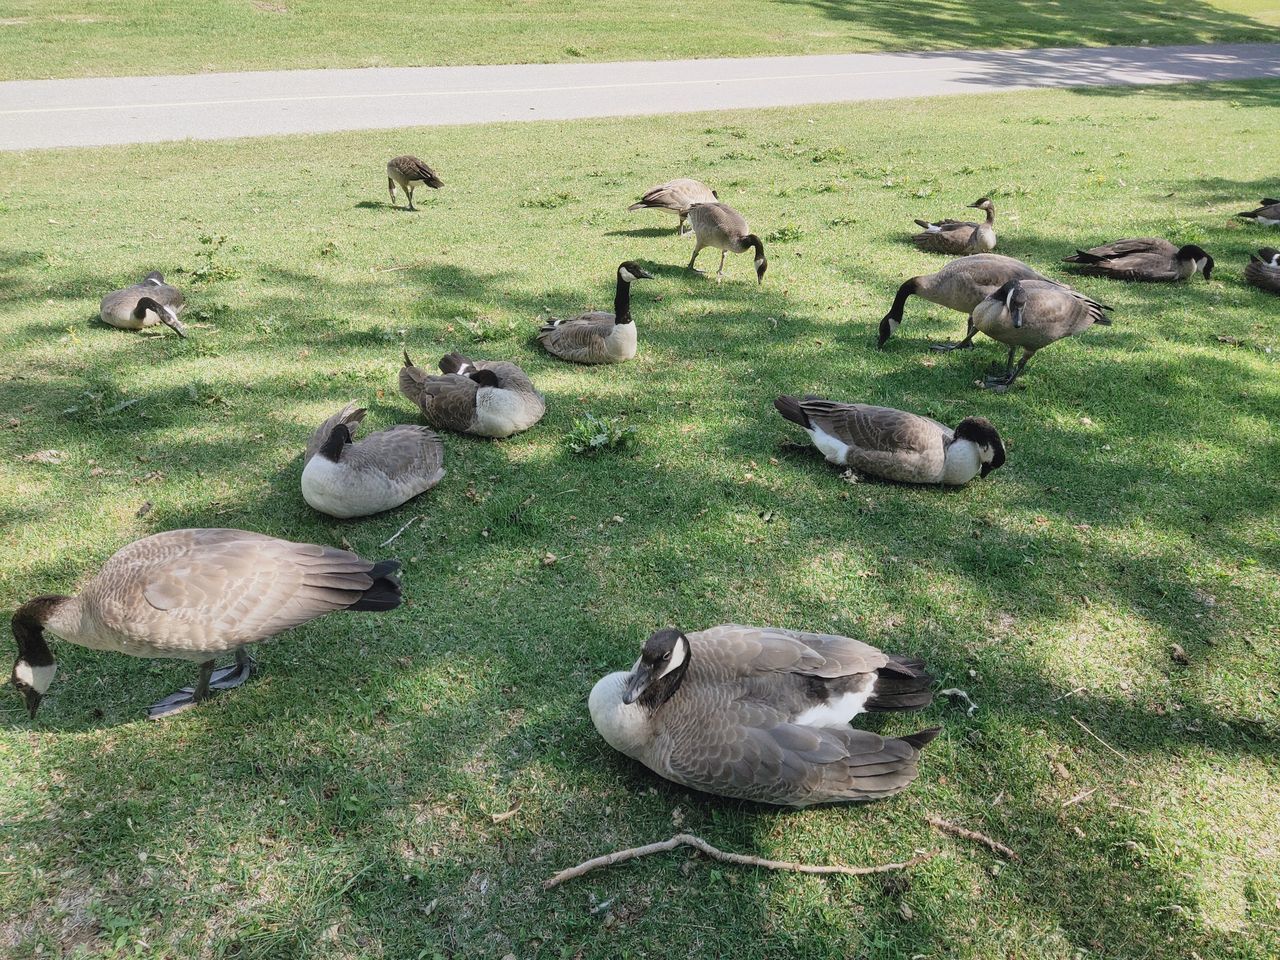 animal, animal themes, group of animals, grass, wildlife, animal wildlife, large group of animals, duck, water bird, ducks, geese and swans, bird, high angle view, nature, no people, goose, plant, day, green, land, field, outdoors, canada goose, beauty in nature, flock of birds